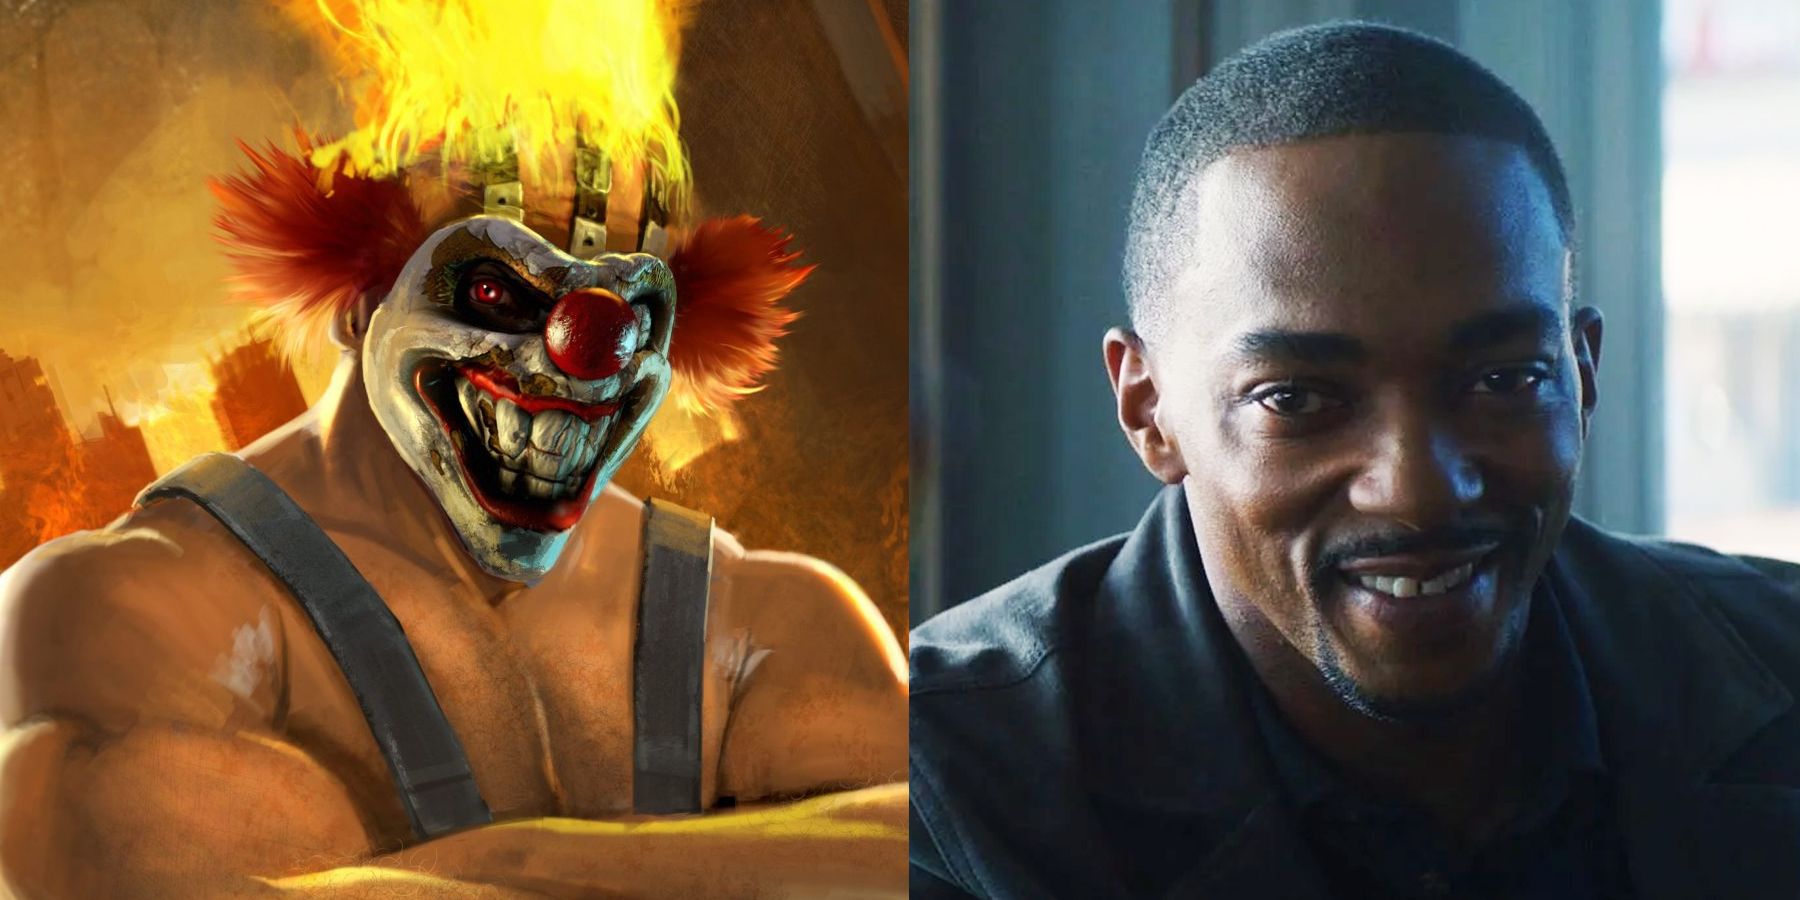 Anthony Mackie has been cast for Twisted Metal series